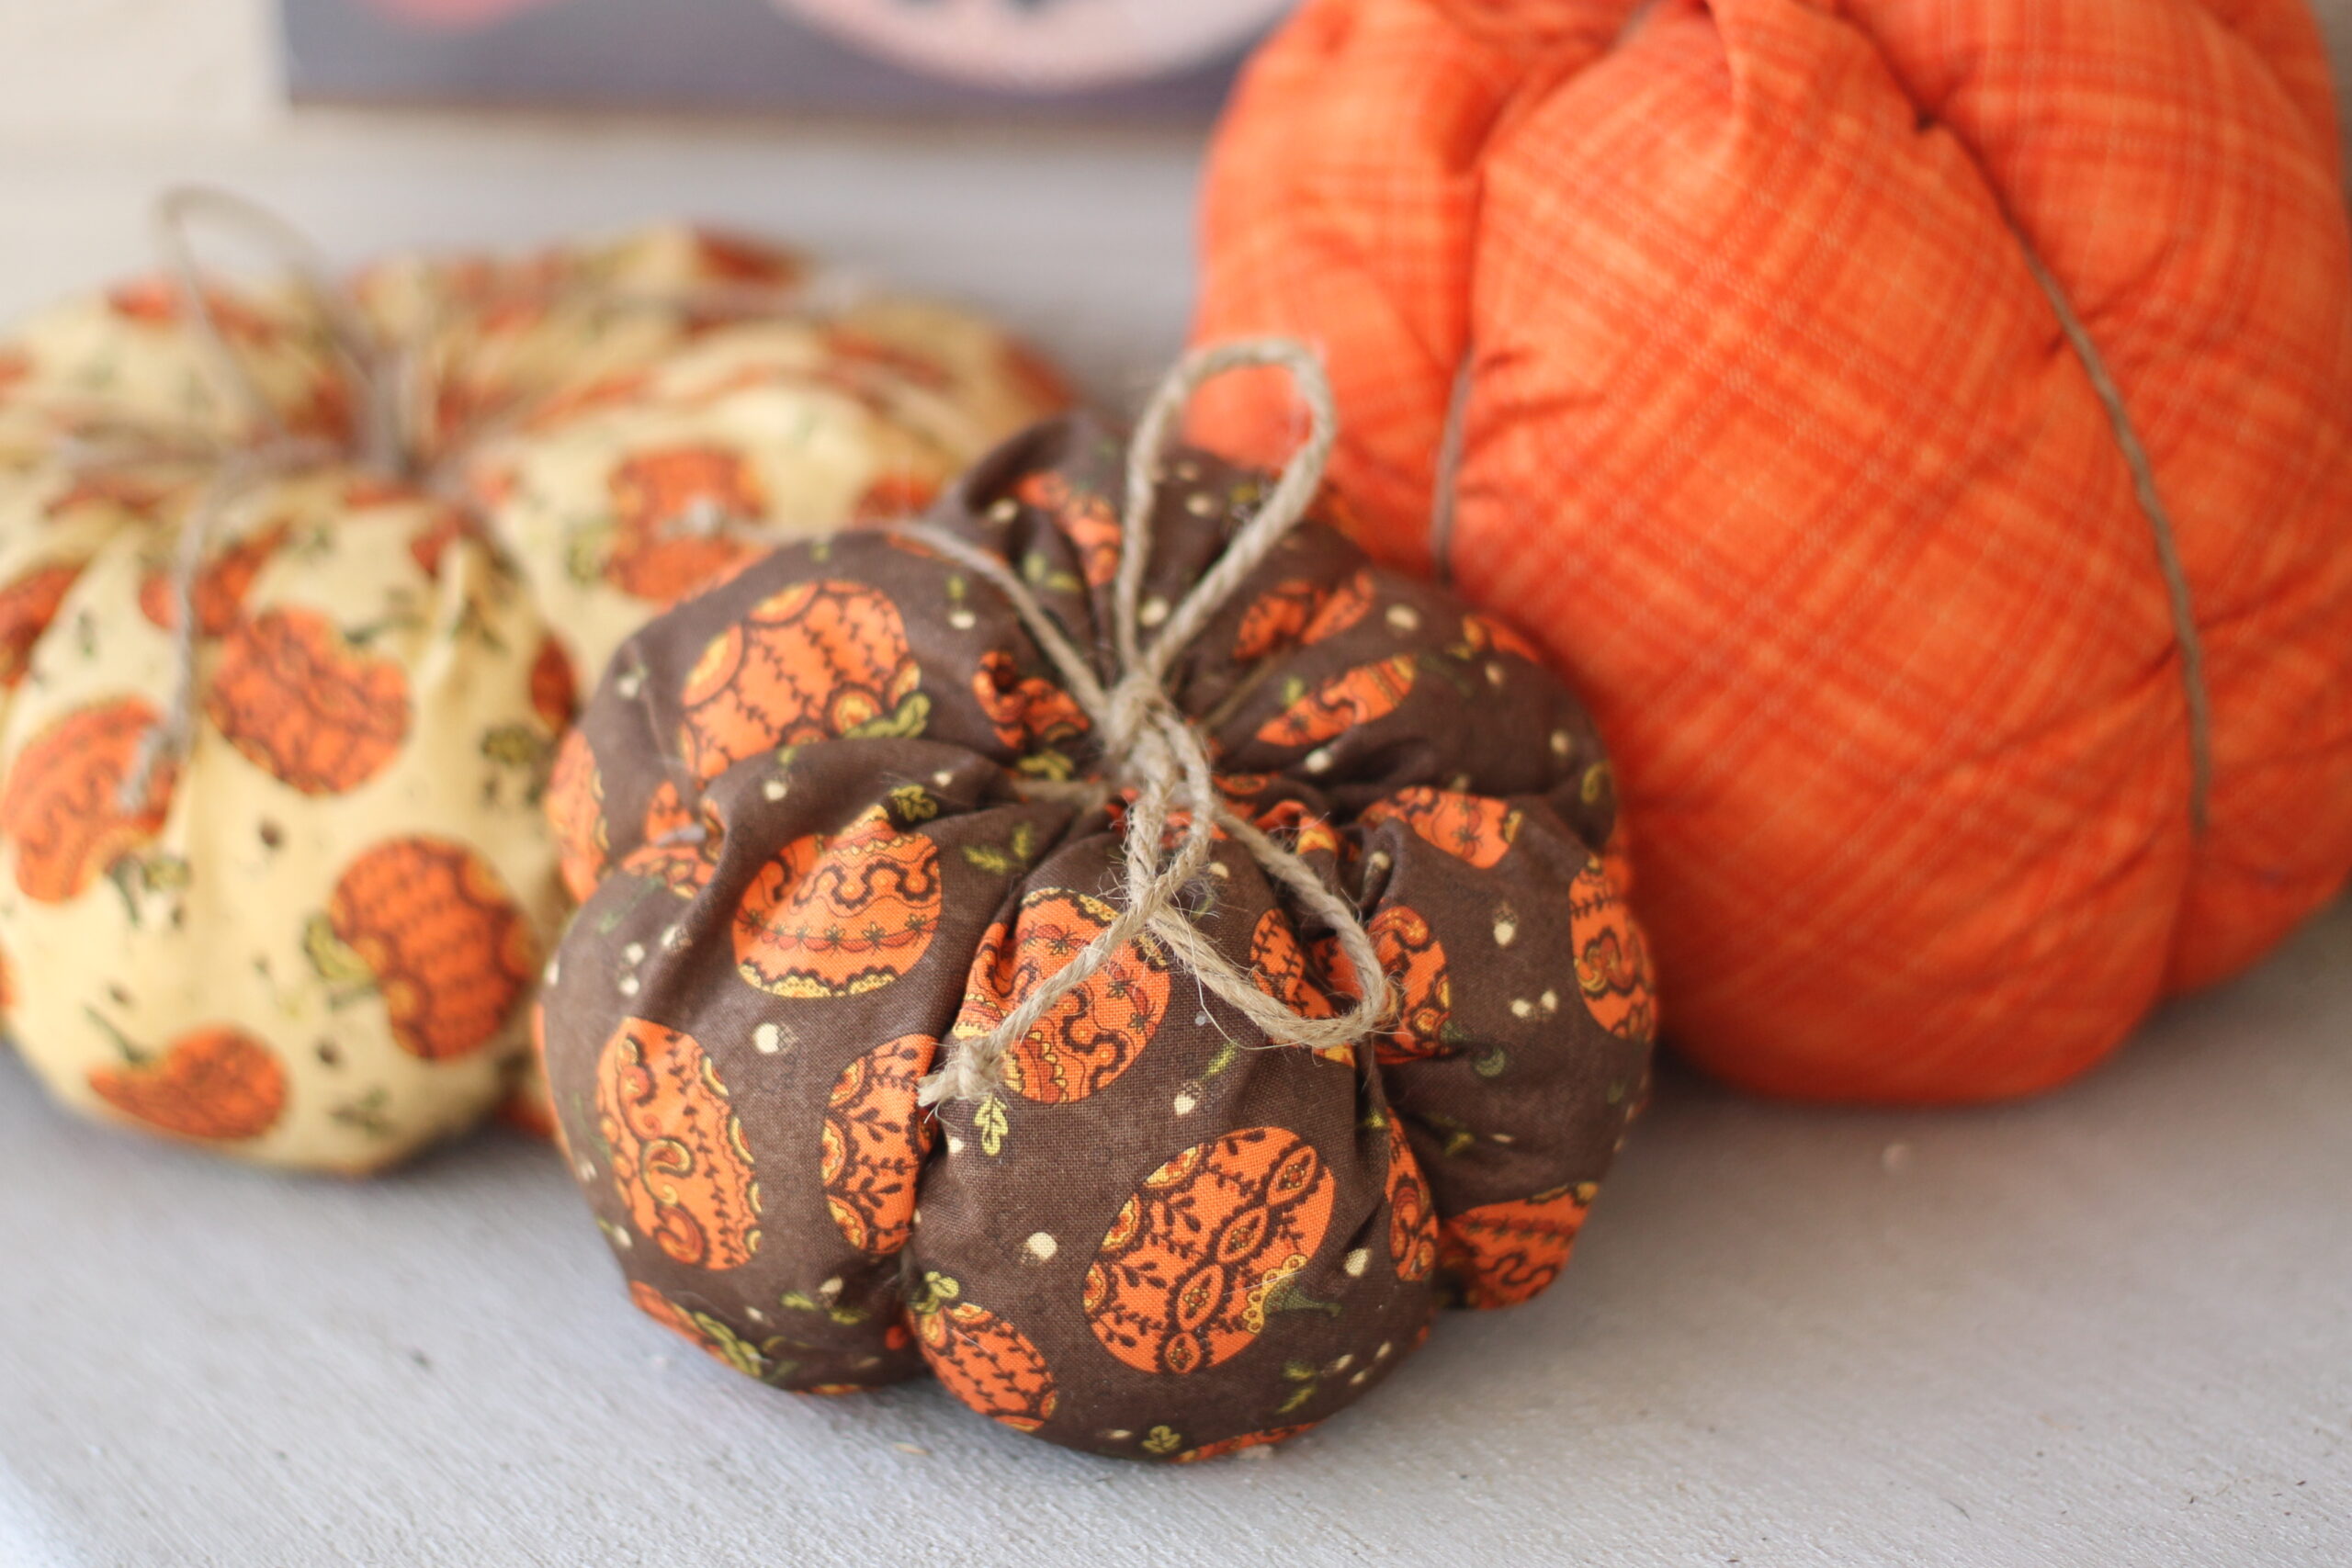 fabric-pumpkins-tutorial-peek-a-boo-pages-patterns-fabric-more